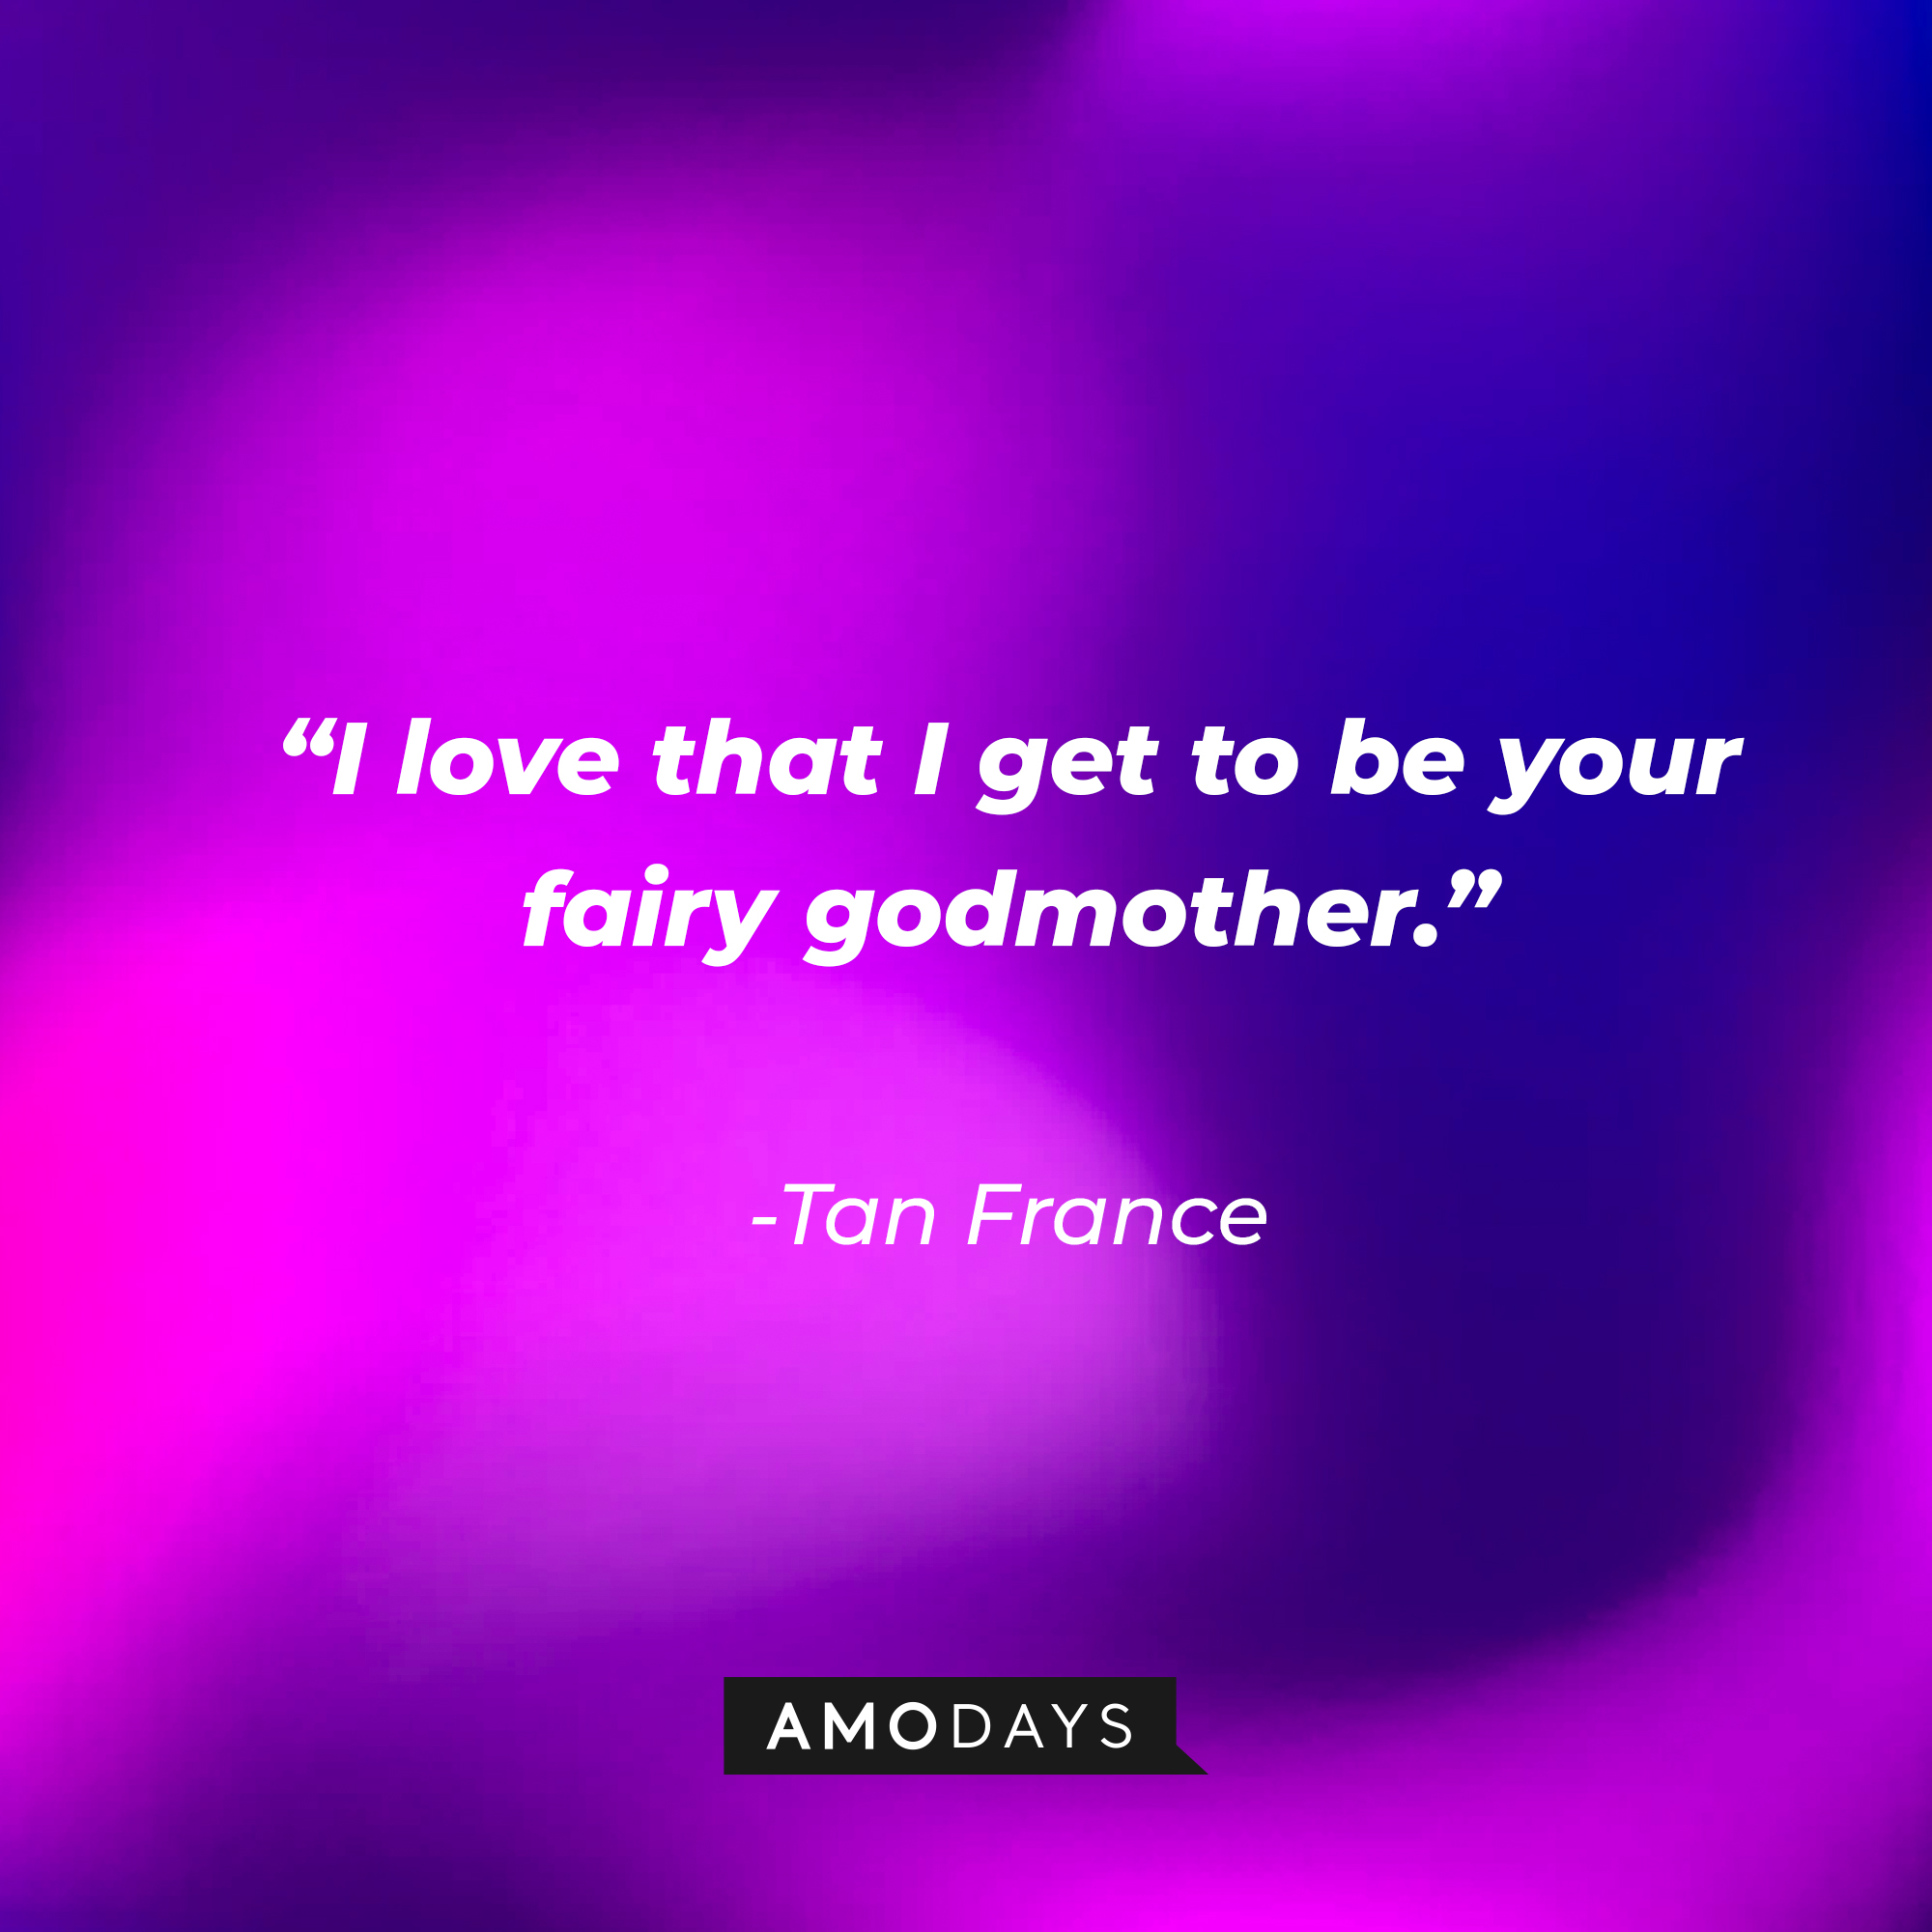 Tan France's quote: "I love that I get to be your fairy godmother." | Source: Getty Images